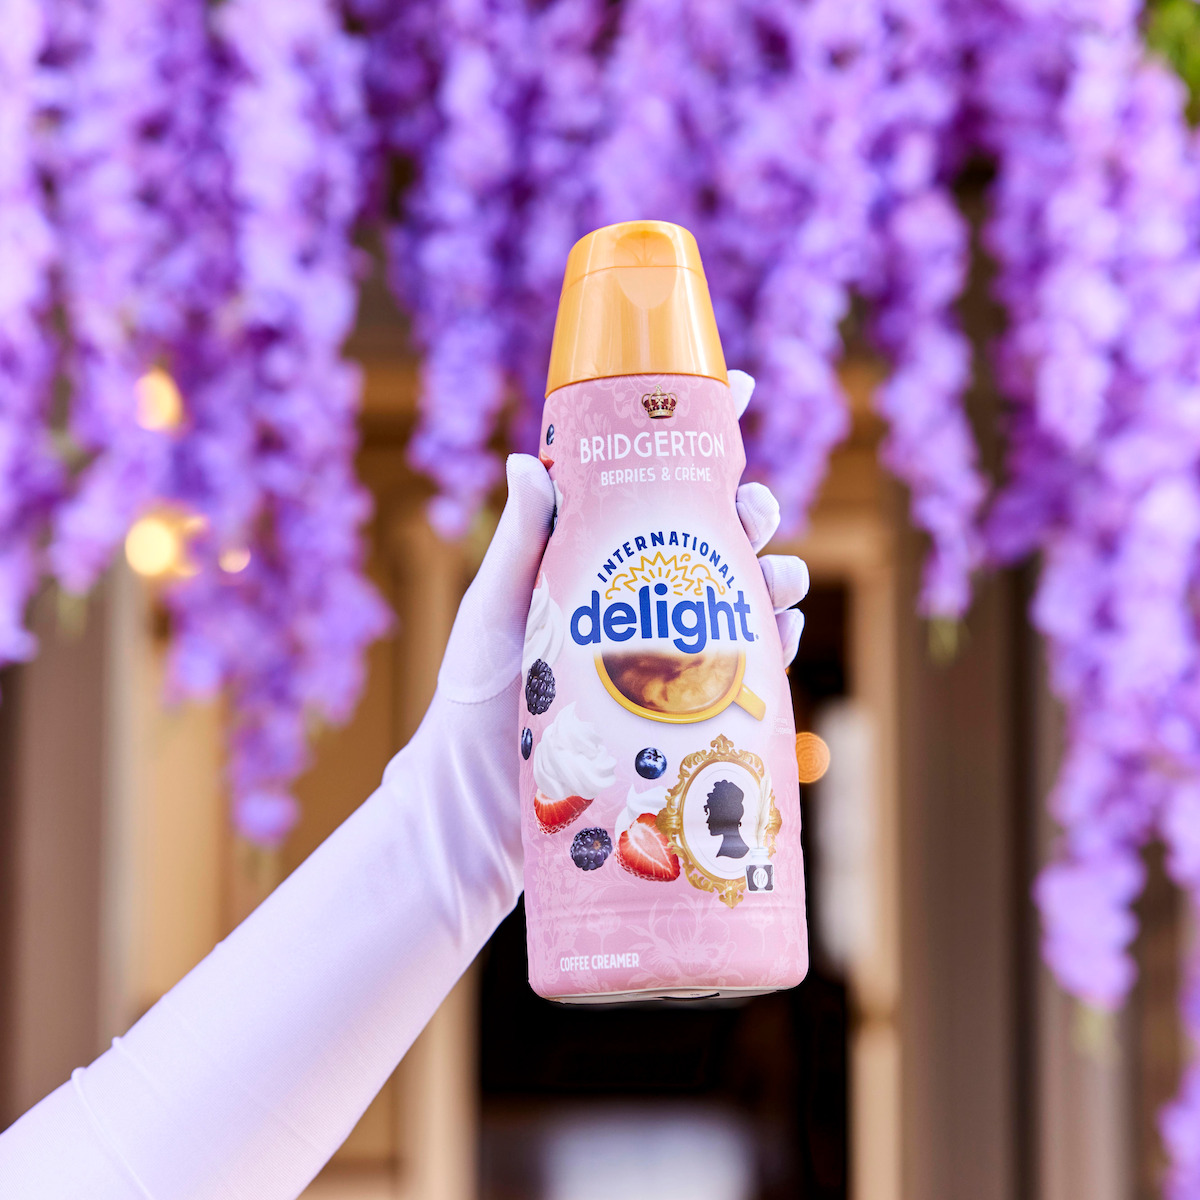 A hand with wearing a white glove holds out a bottle of creamer from the ‘Bridgerton’ collaboration International Delight